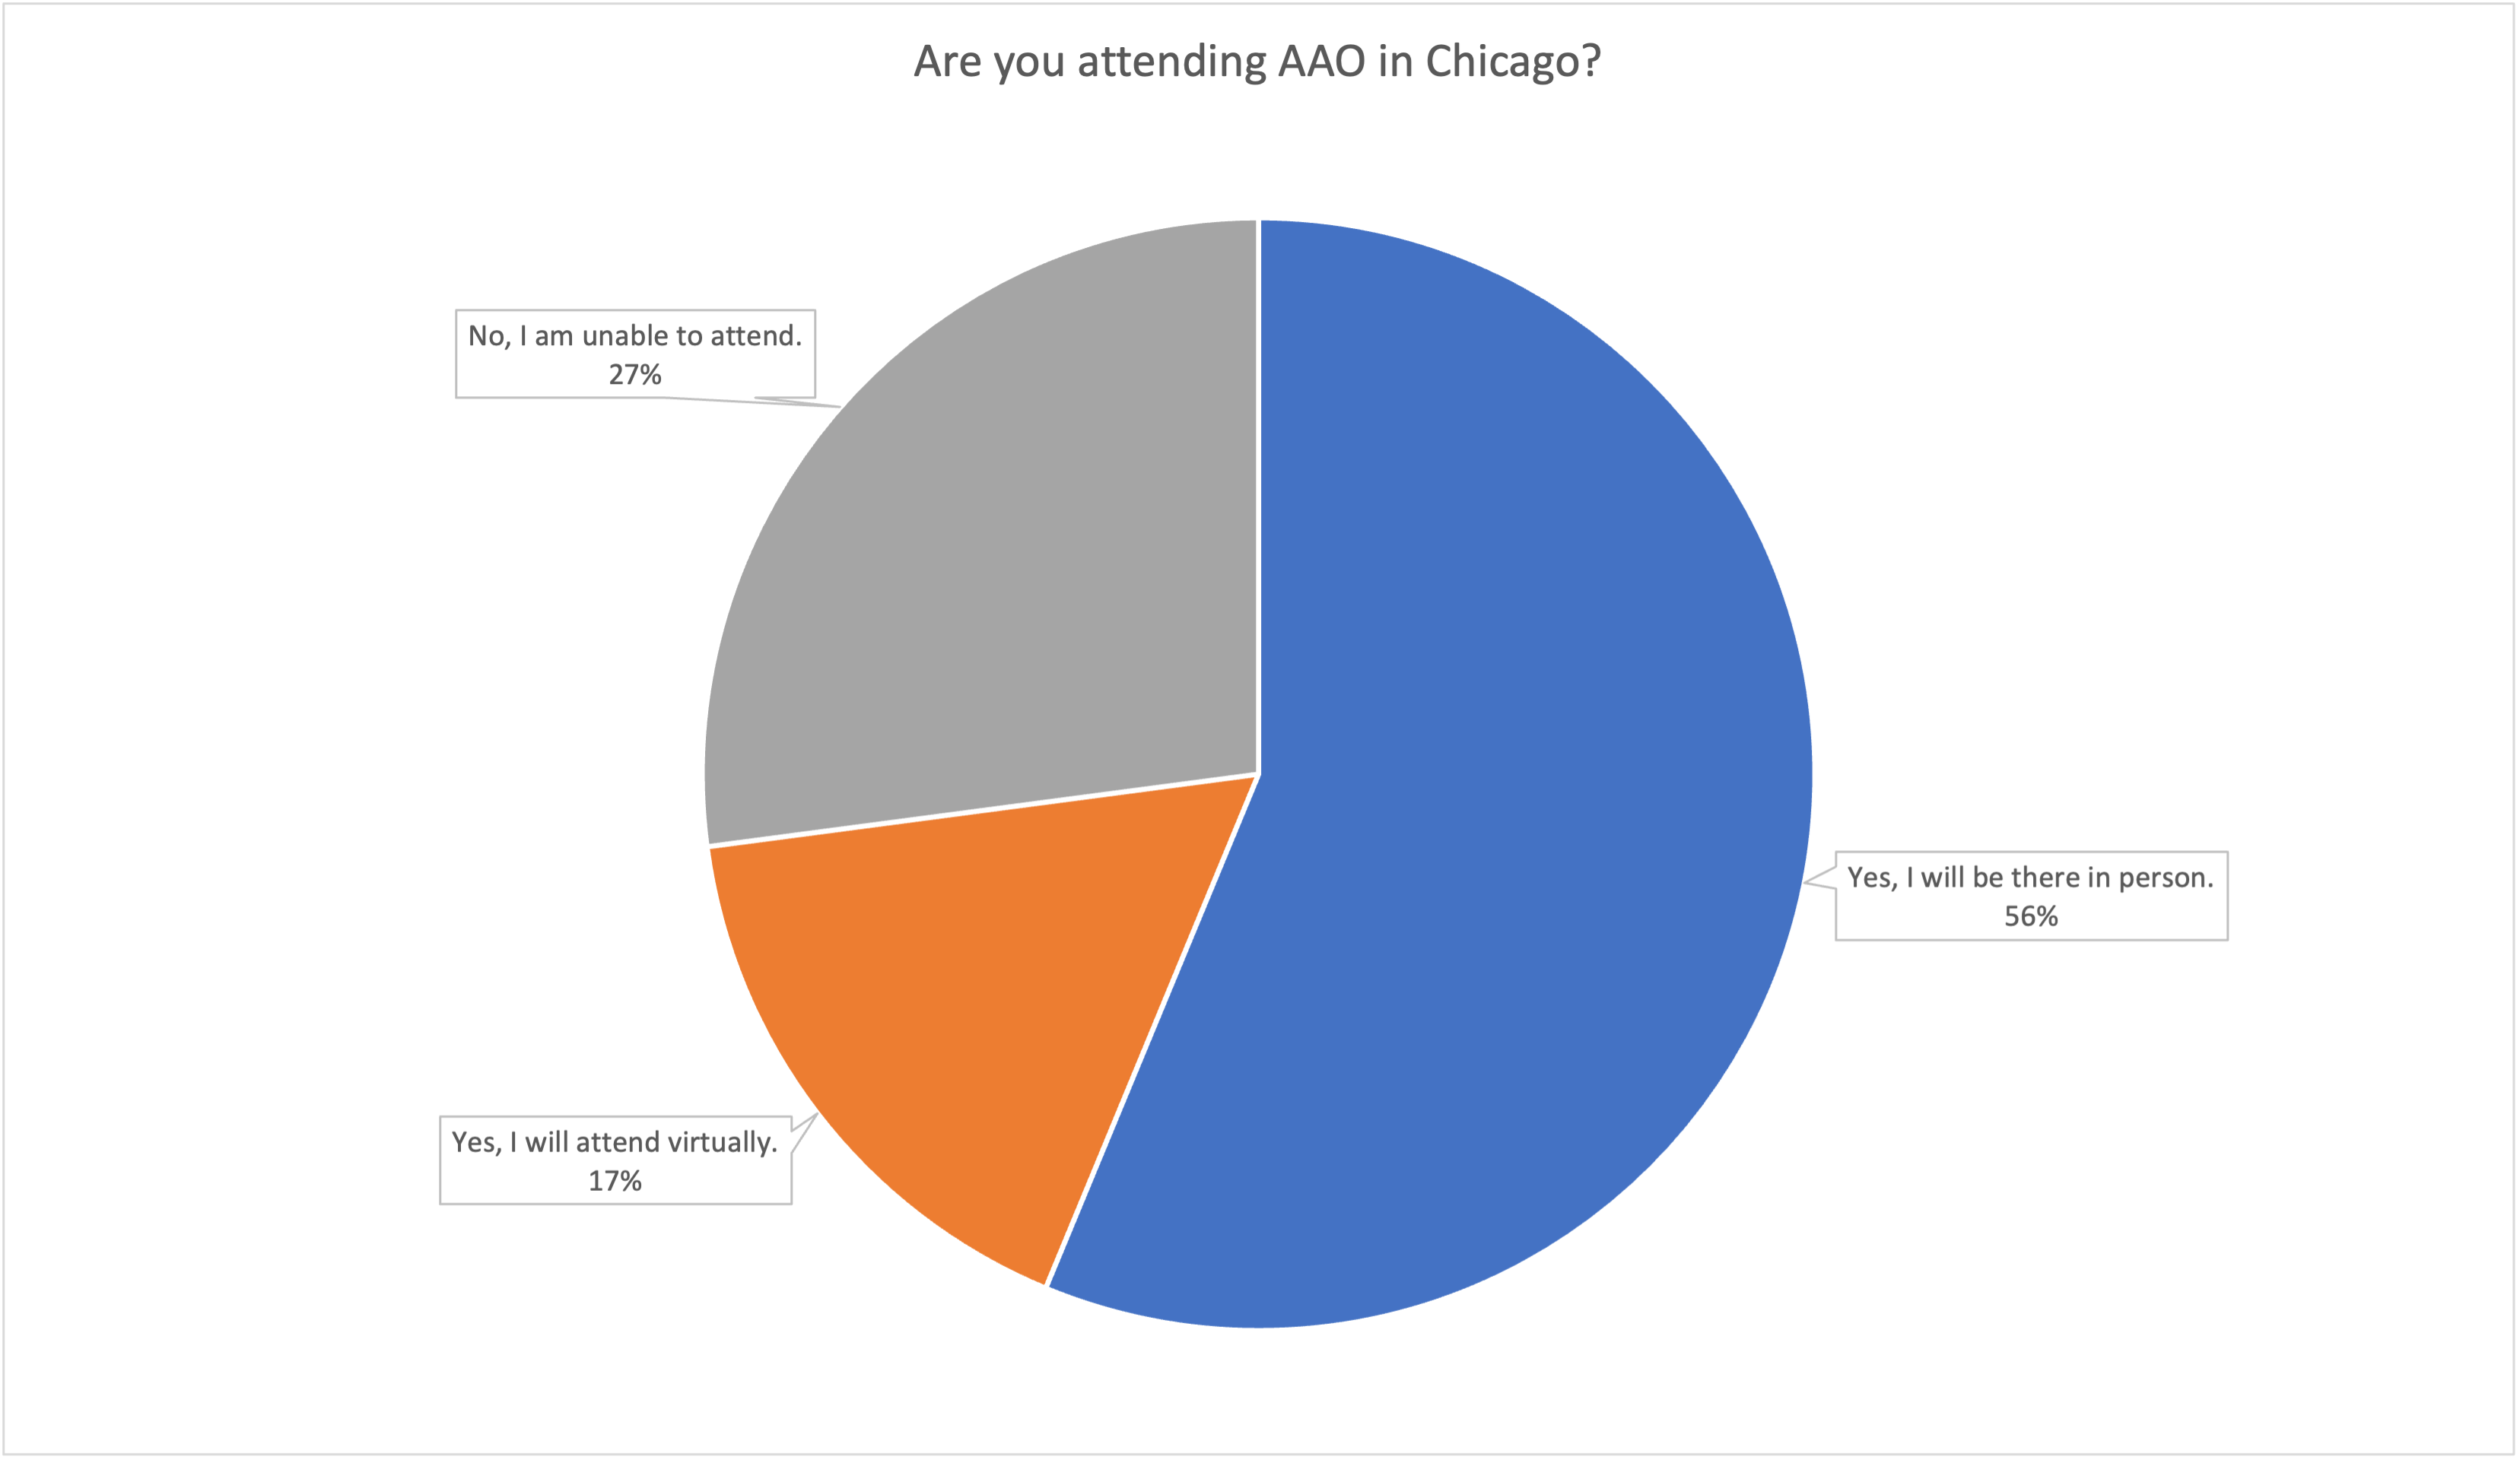 Poll results: Are you attending AAO in Chicago?